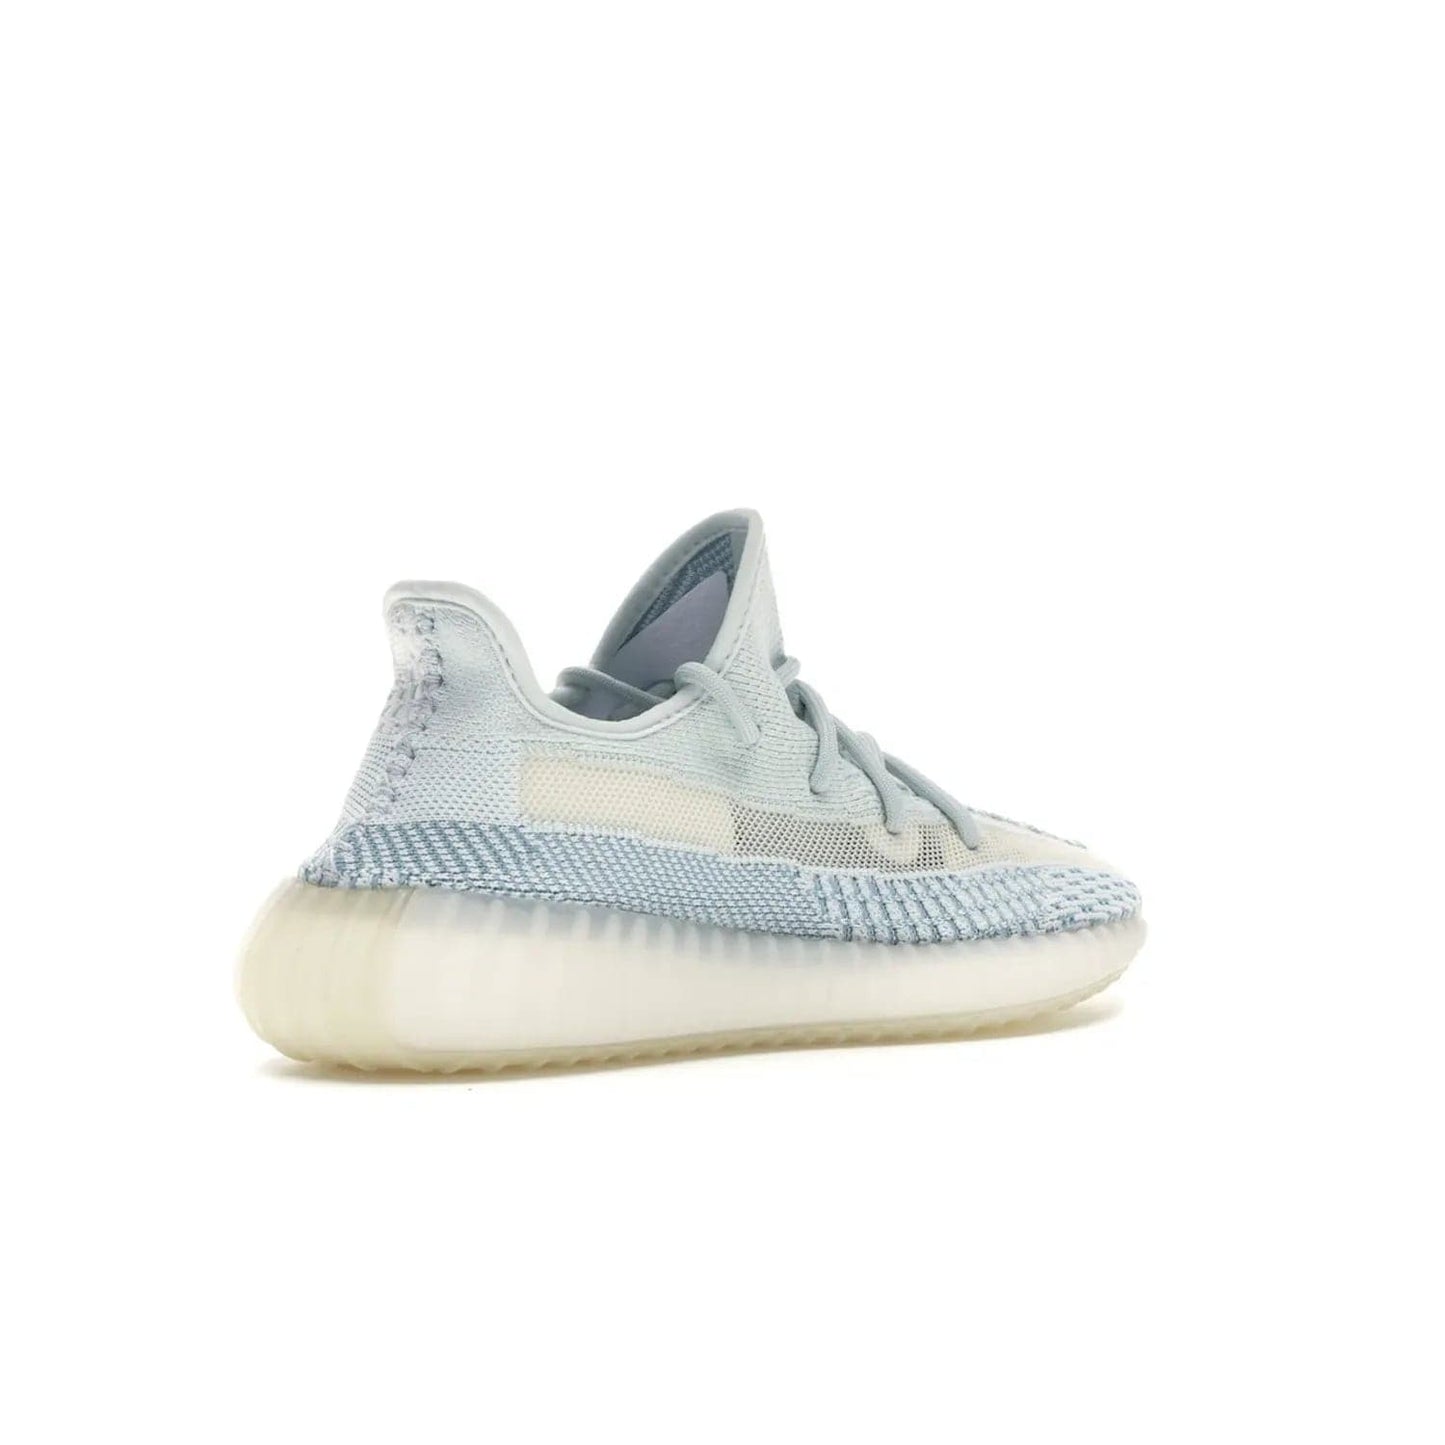 adidas Yeezy Boost 350 V2 Cloud White (Non-Reflective) - Image 33 - Only at www.BallersClubKickz.com - Adidas Yeezy Boost 350 V2 Cloud White (Non-Reflective) features Primeknit fabric and a unique, eye-catching design of cream, bluish-white, and transparent strip. Step out in timeless style with this eye-catching sneaker.